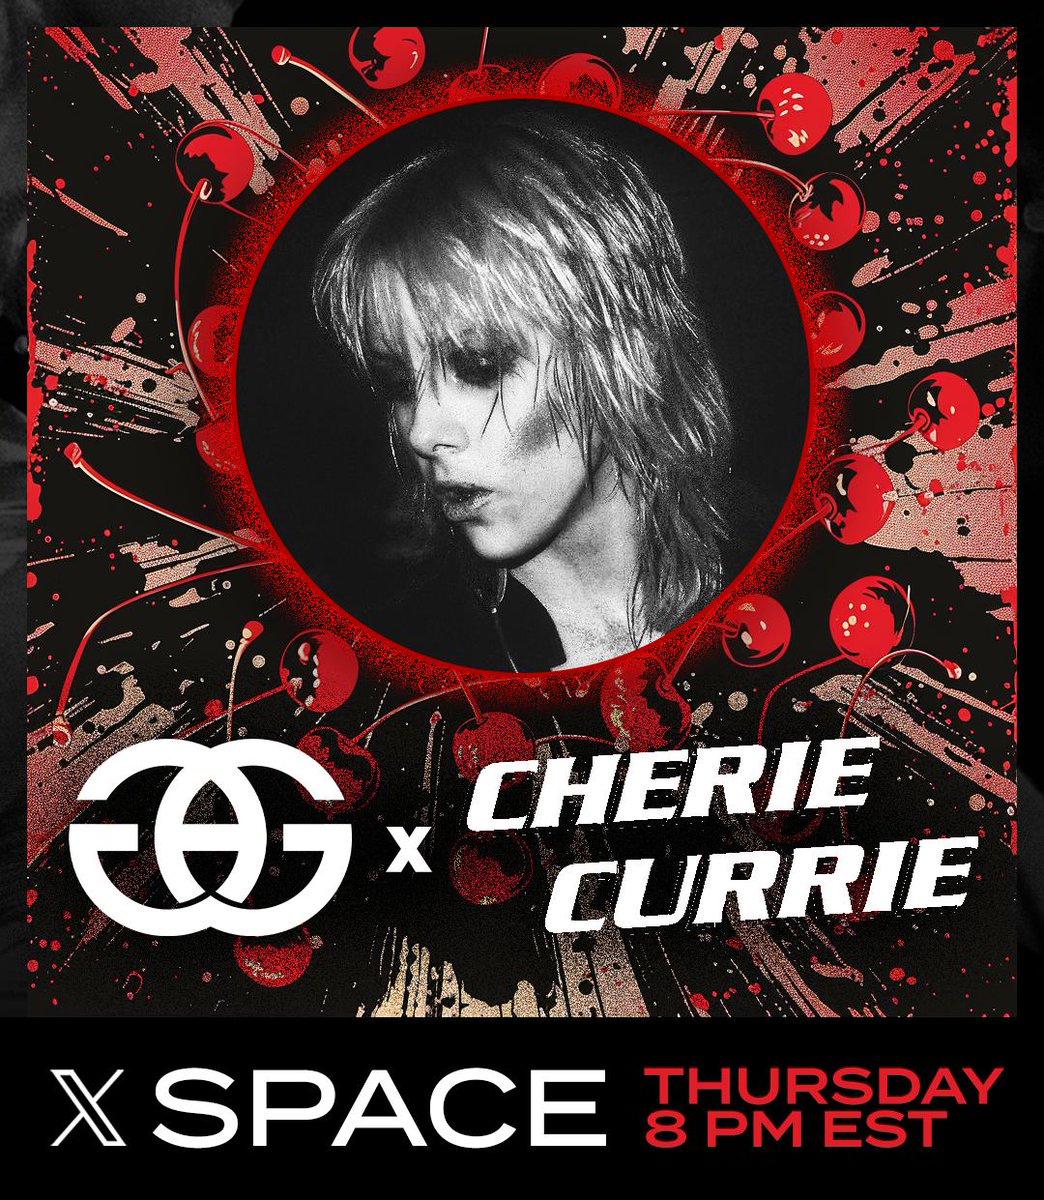 Join us tomorrow night for our weekly 𝕏 Space 🎙️ where we'll be joined by the one and only @CherieCurrie3 of The Runaways. She has been extremely vocal in speaking out against the grooming and transing of children and we are so excited to have her! 8 pm EST.